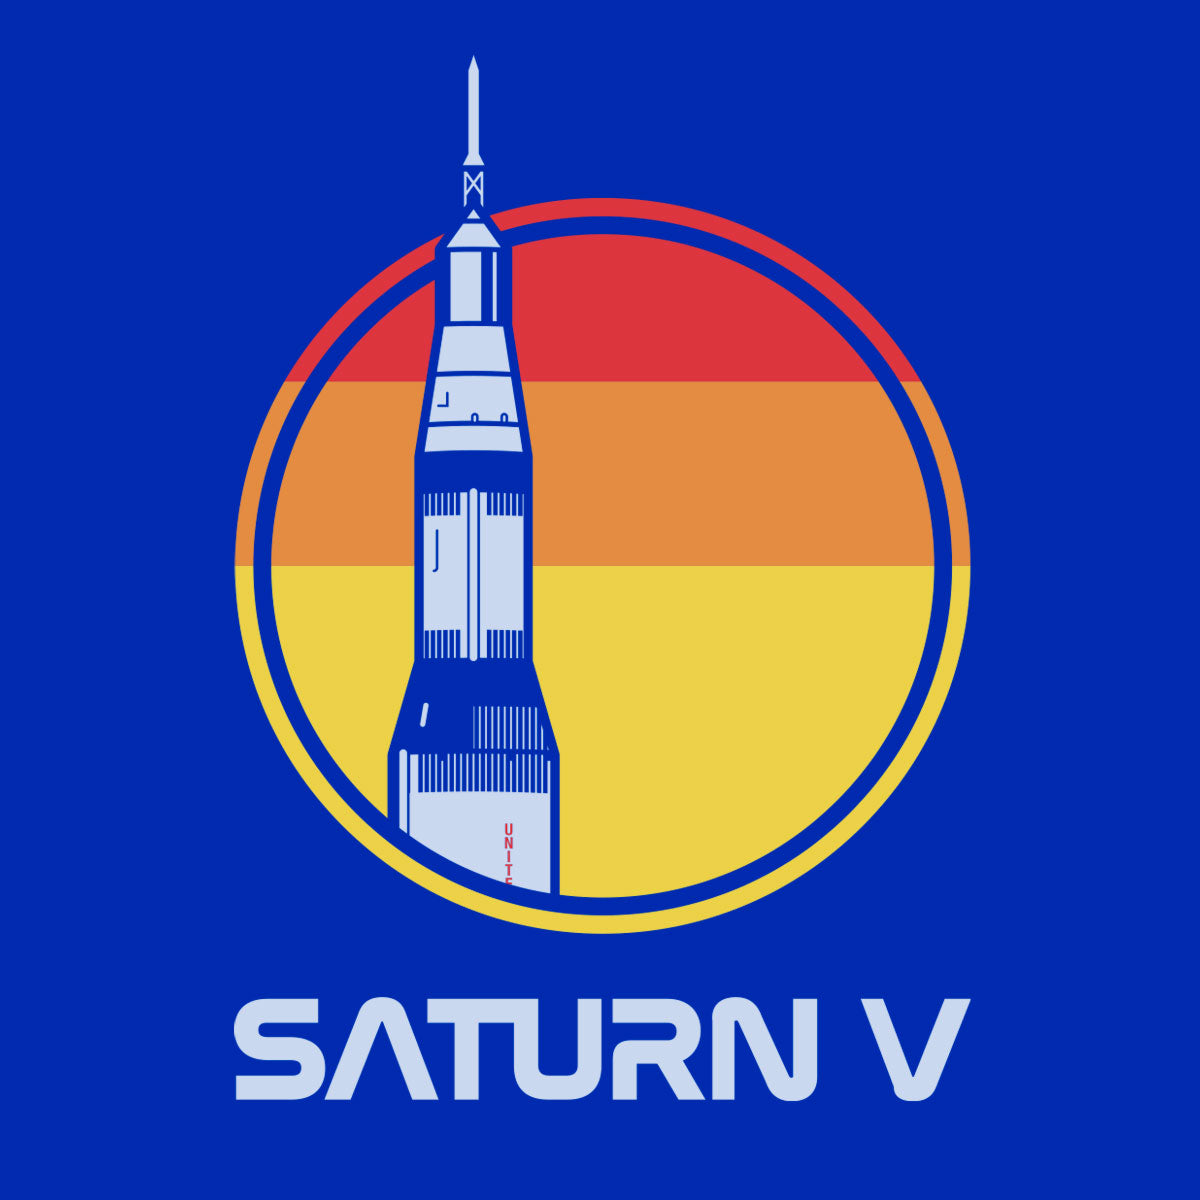 "saturn V" text with the Saturn V rocket in a sunset on a blue background